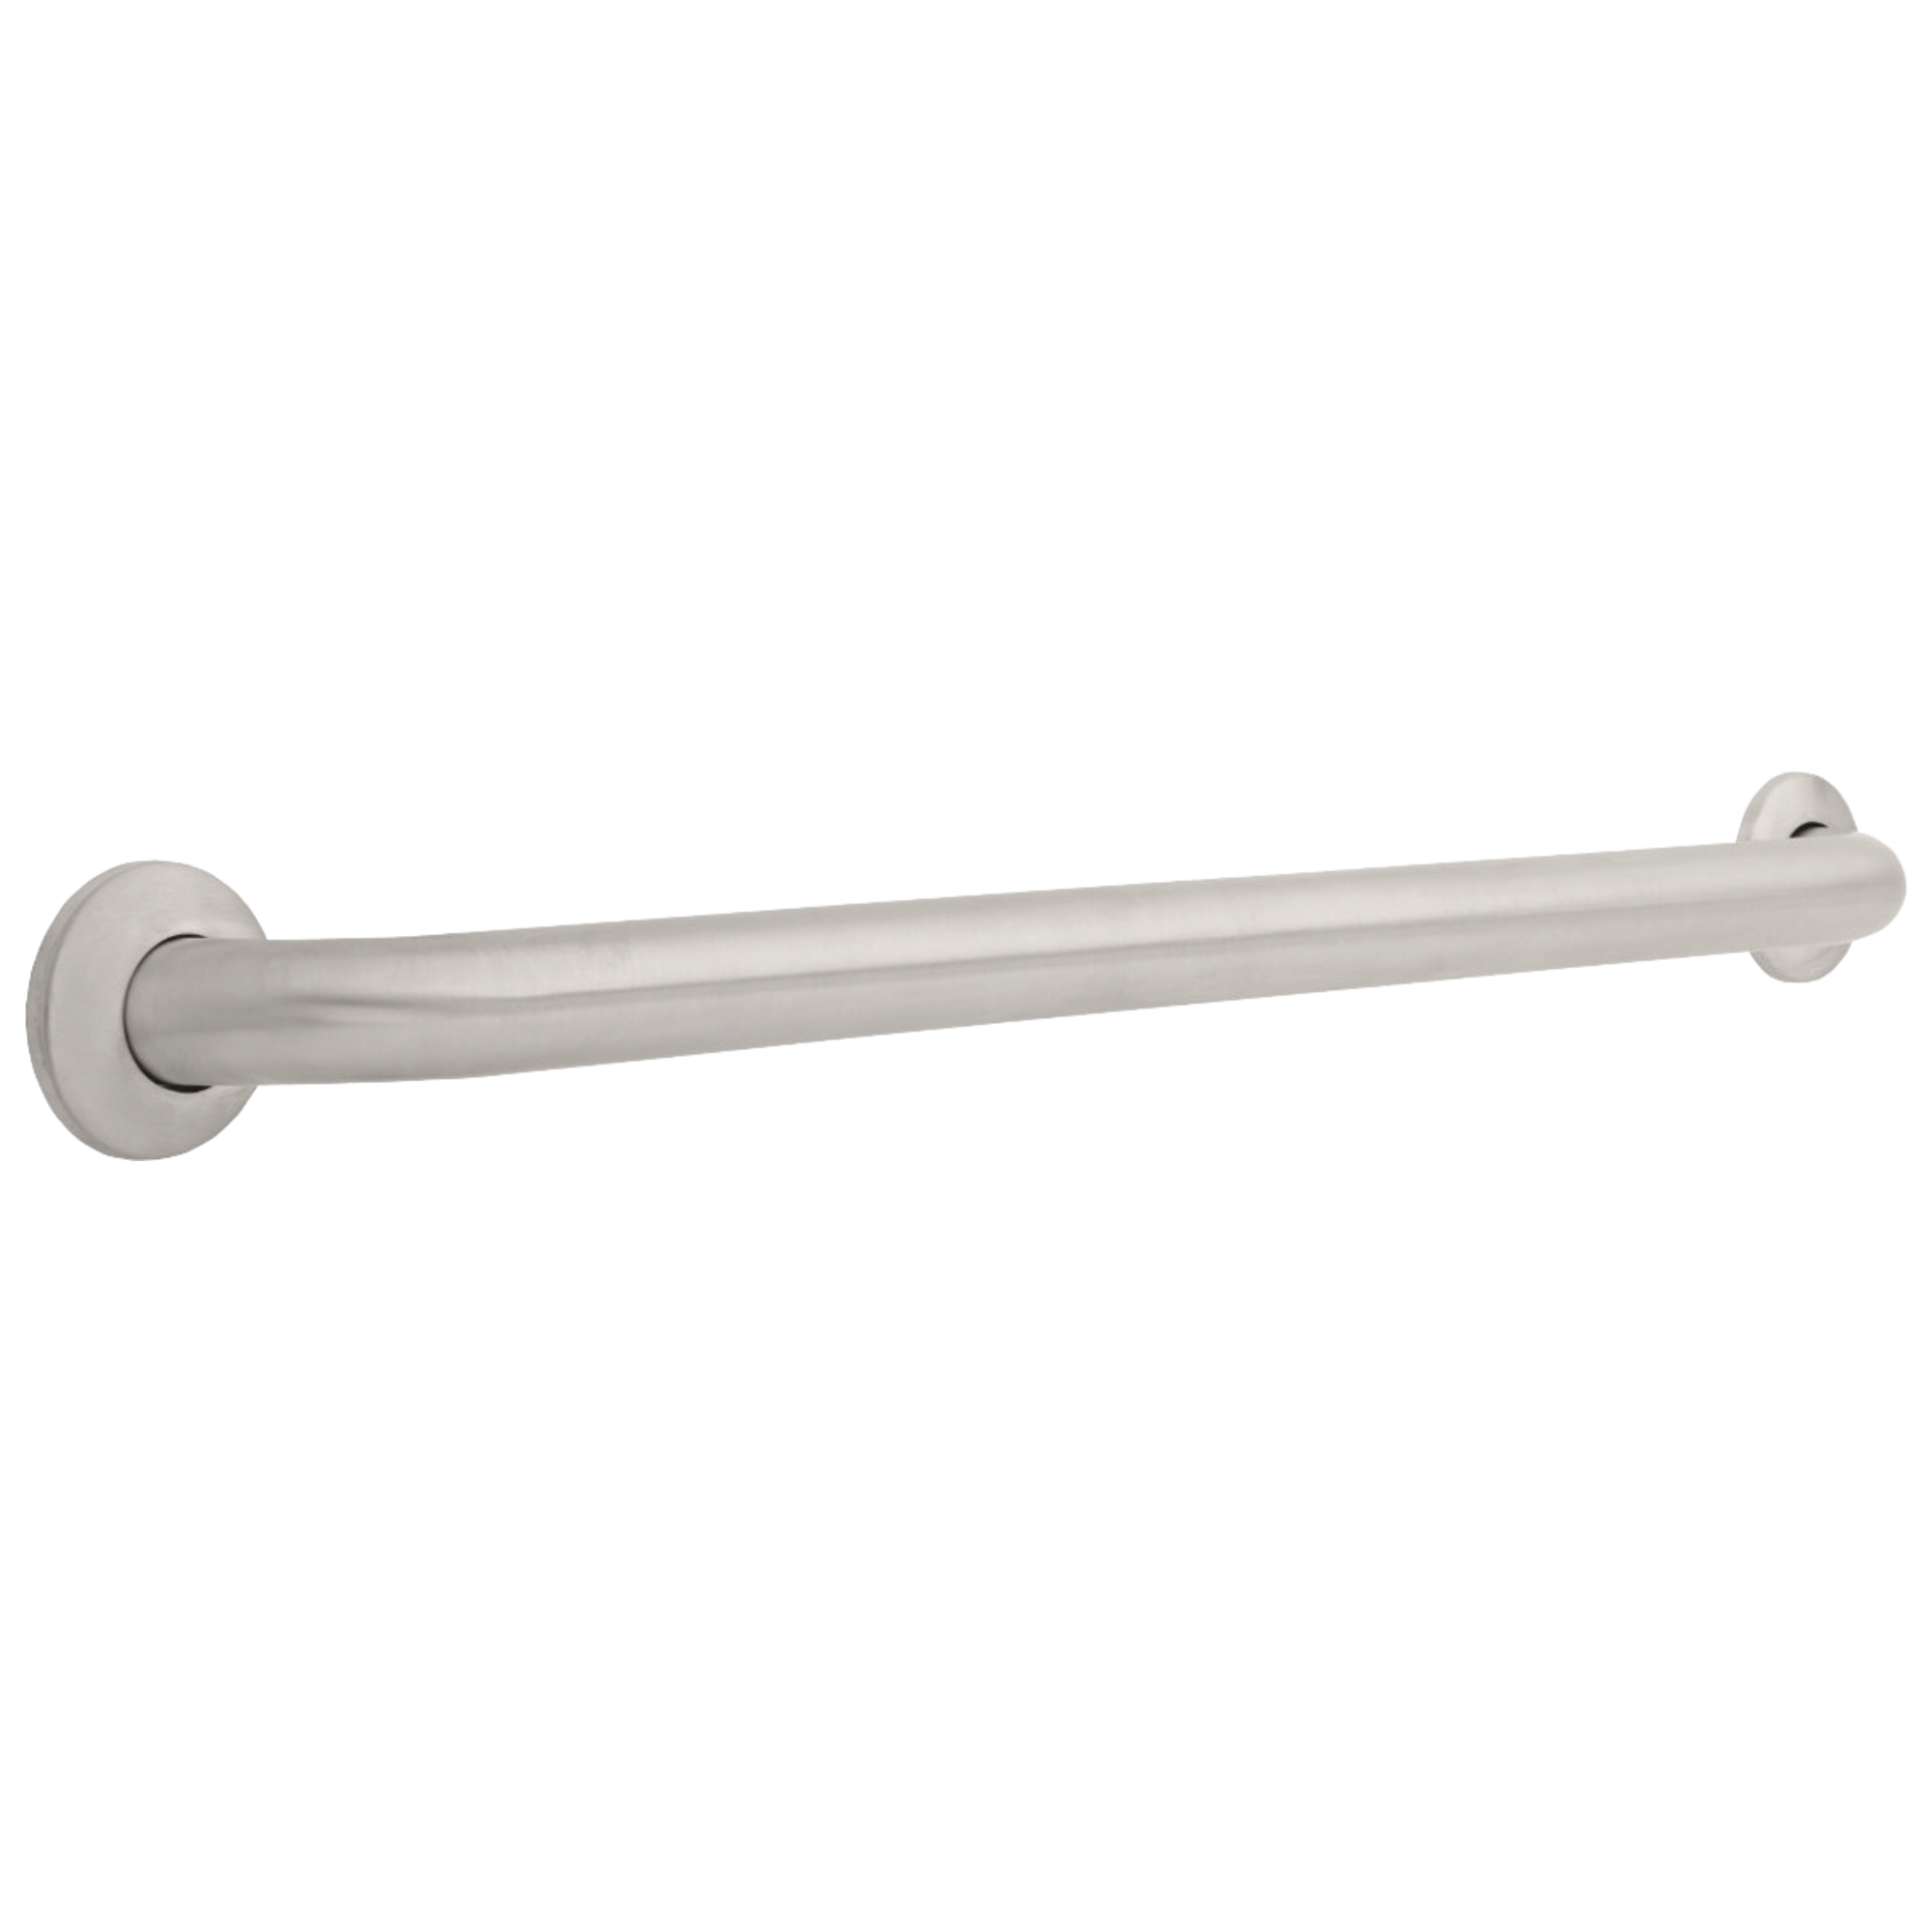 Delta Commercial Other: 1-1/2" x 30" ADA Grab Bar, Concealed Mounting